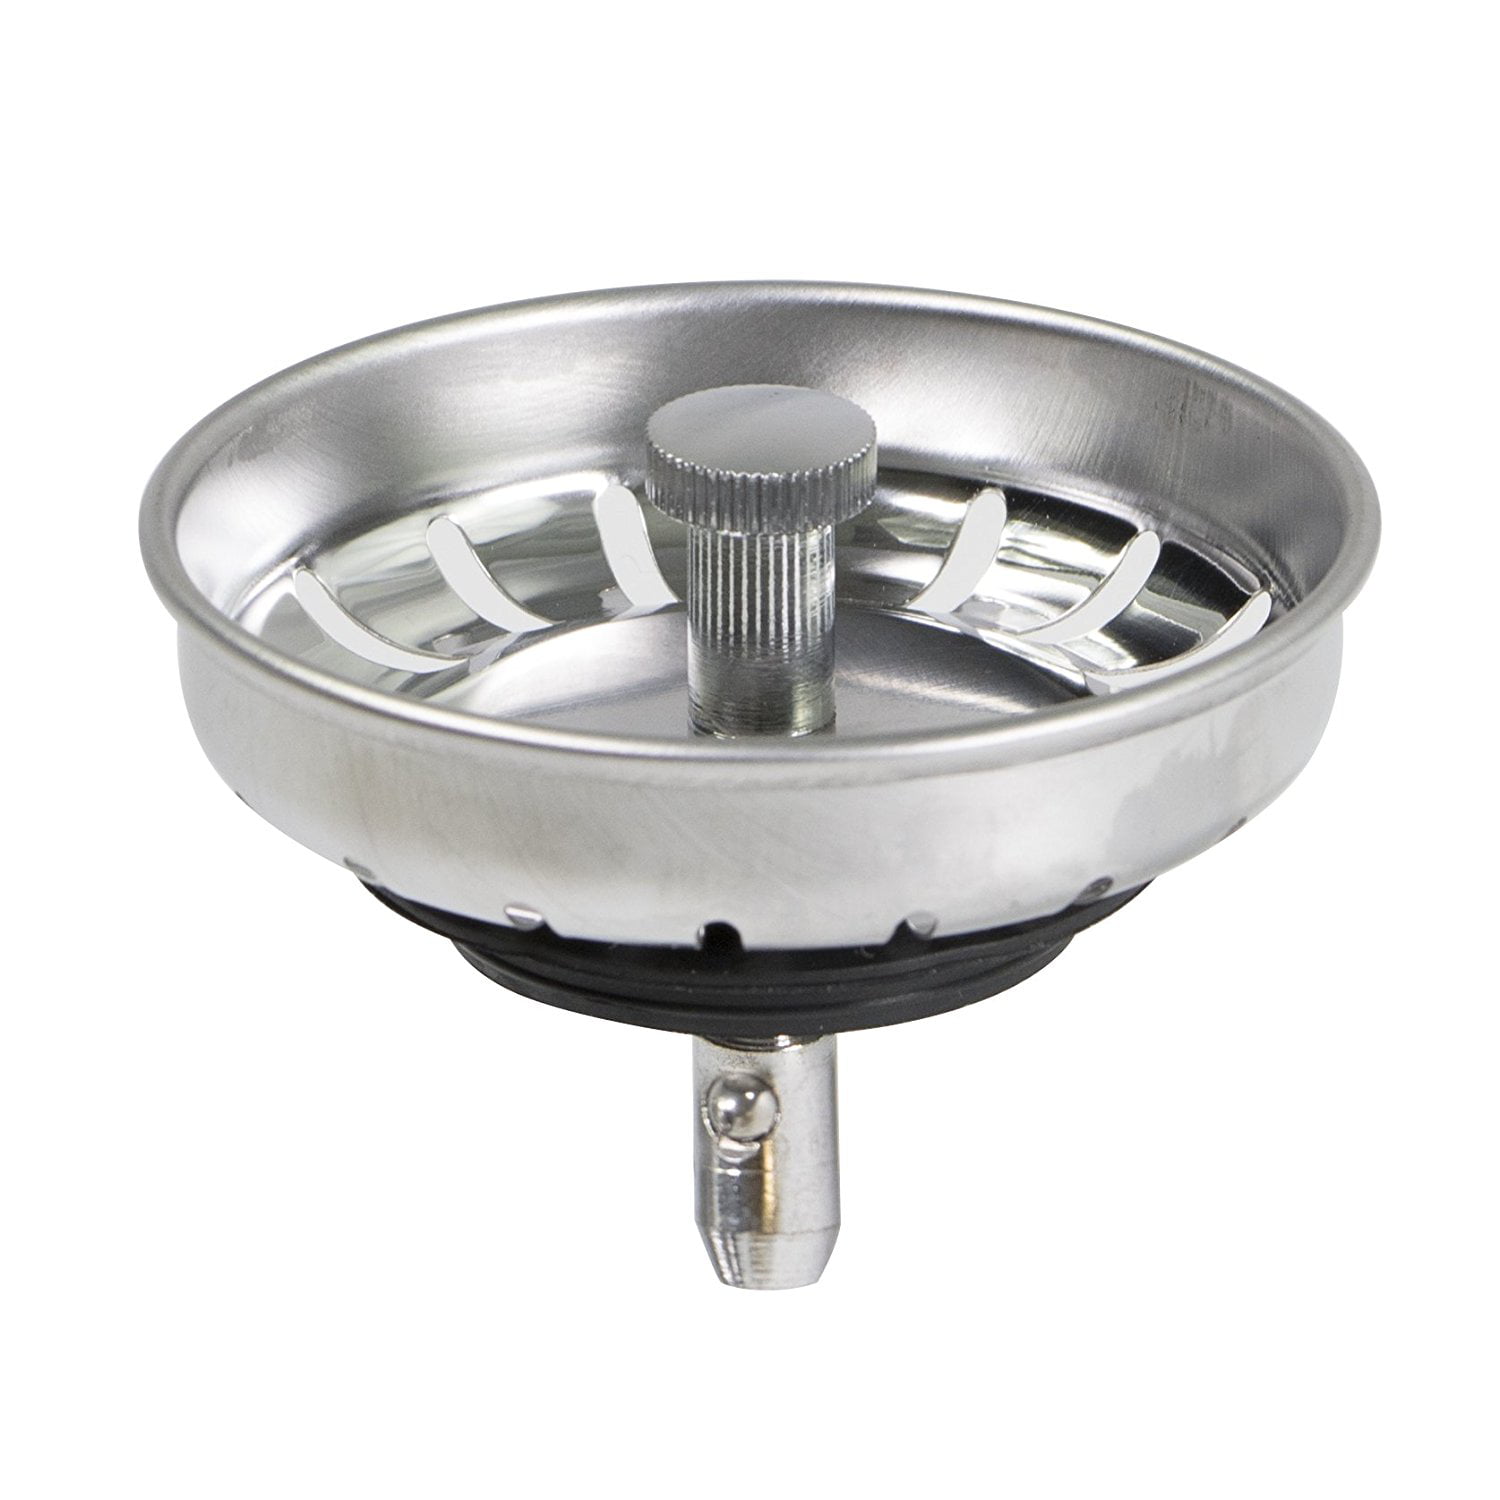 Details about   EverFlow Kitchen Sink Basket Strainer Stainless Steel and Drain Stopper 